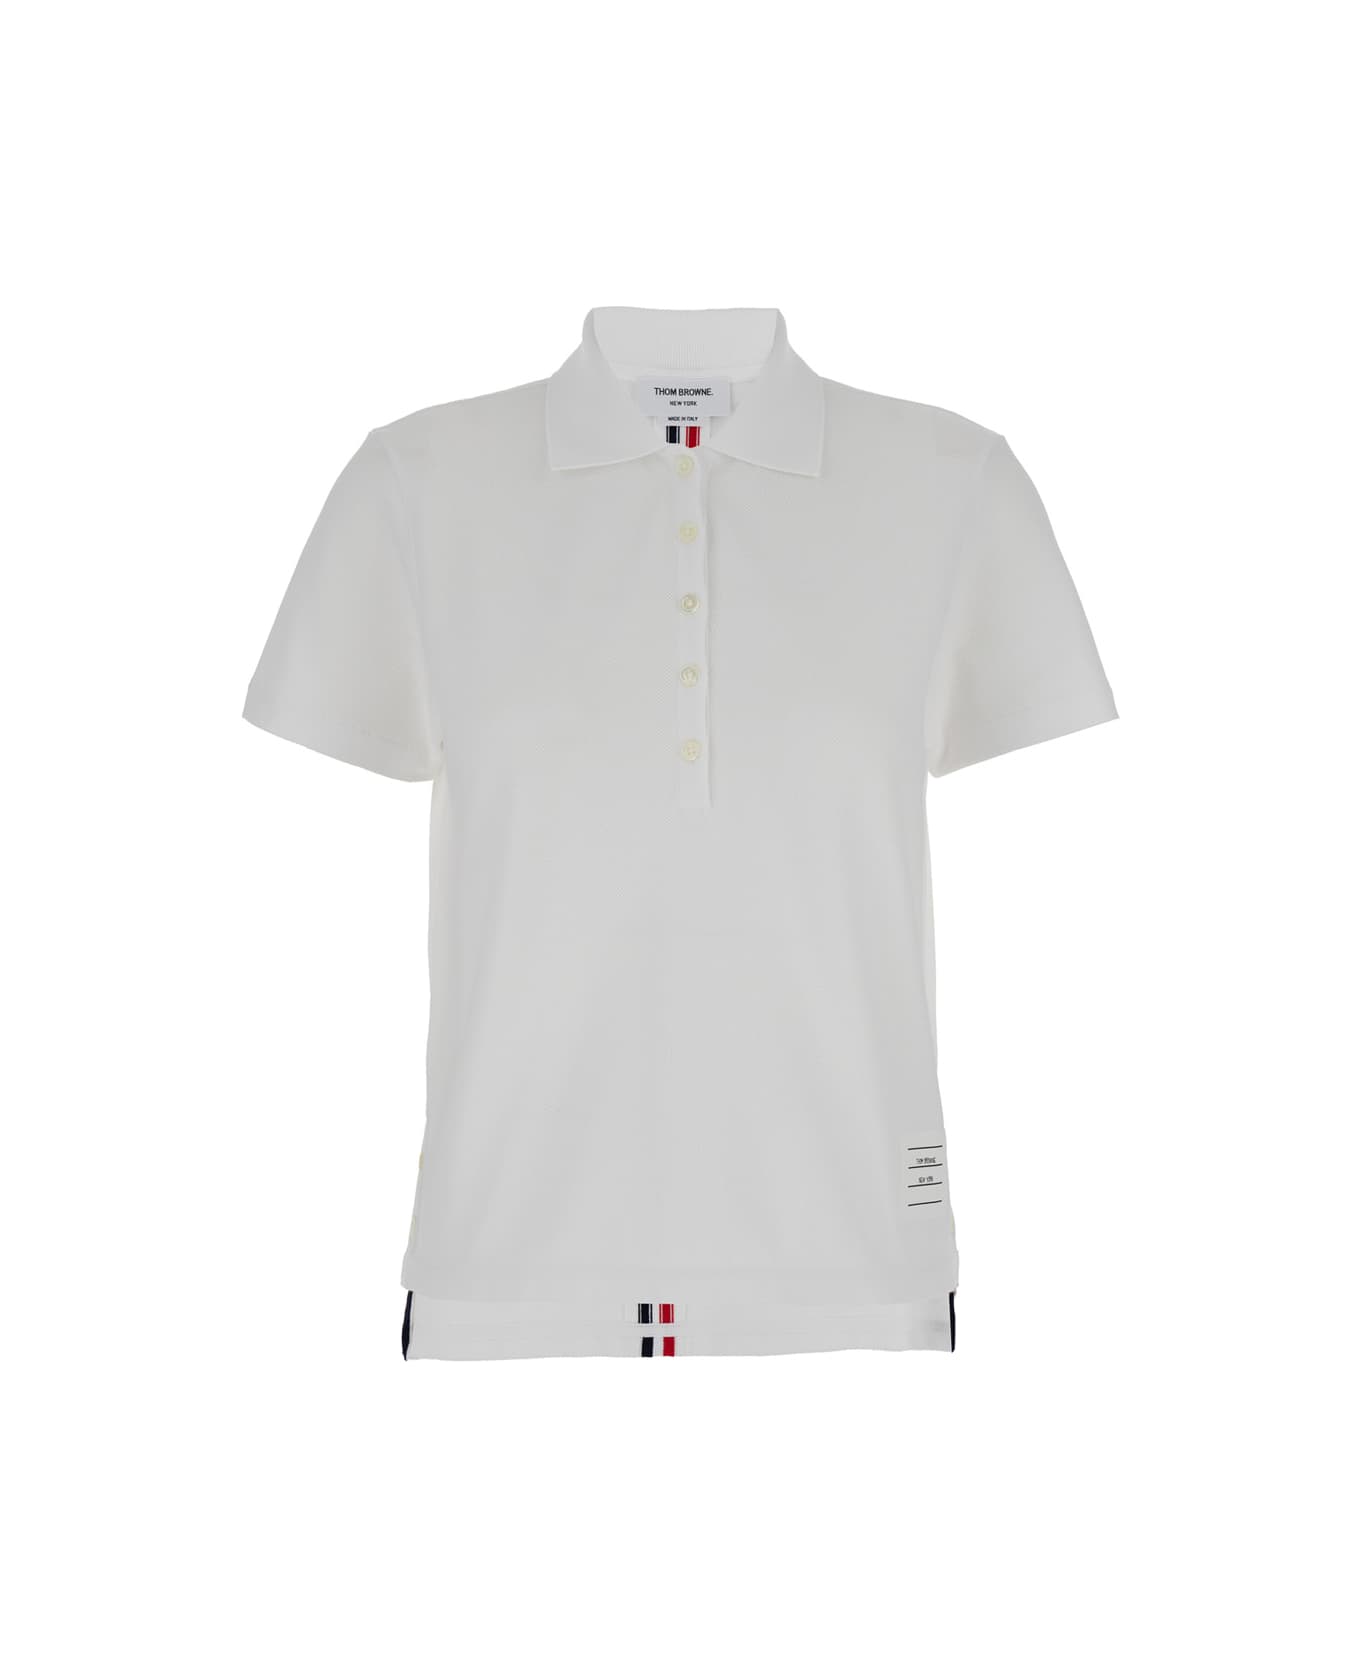 Thom Browne Relaxed Fit Short Sleeve Polo W/ Center Back Rwb Stripe In Classic Pique - White